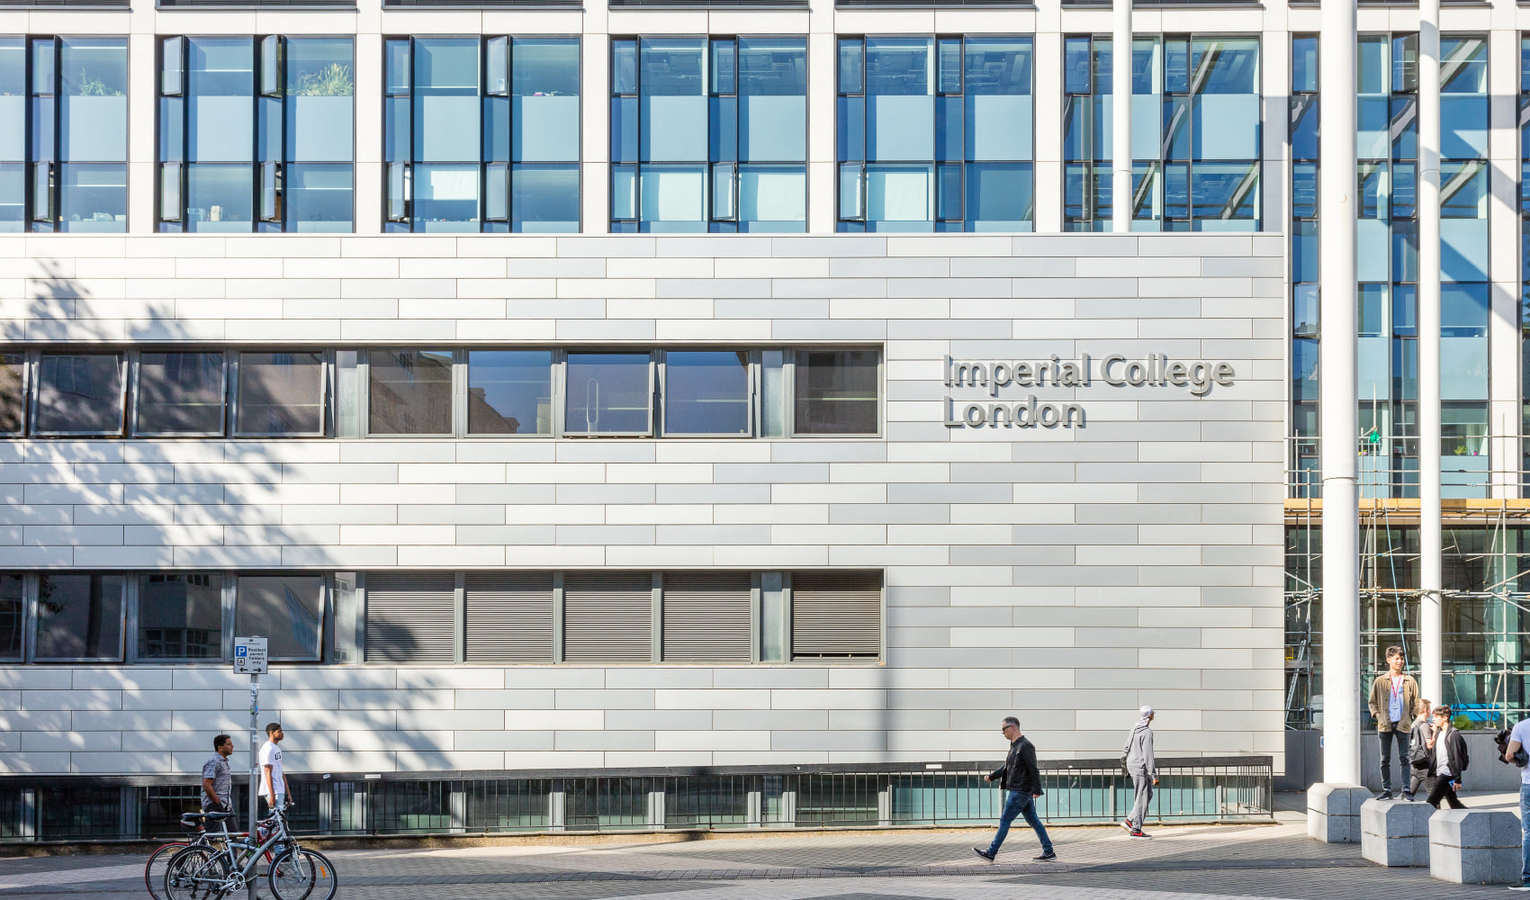 Imperial College London: Developing a first-class recruitment solution